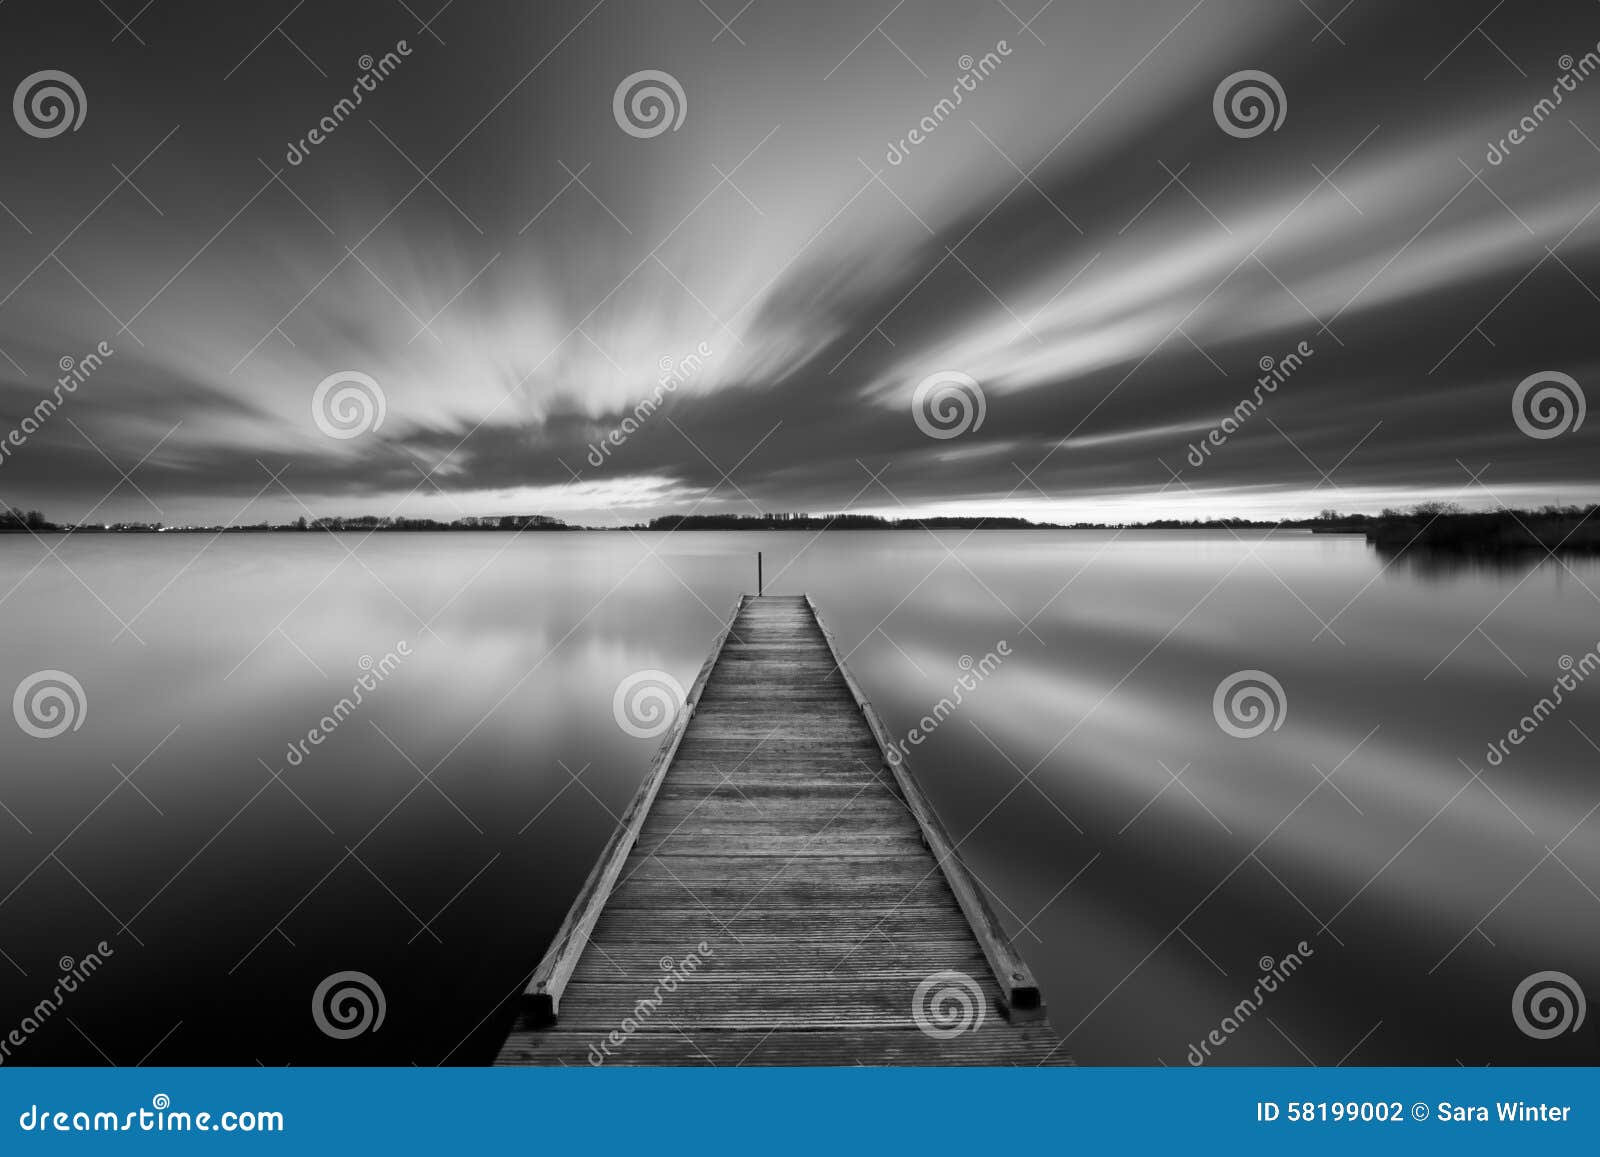 jetty on a lake in black and white